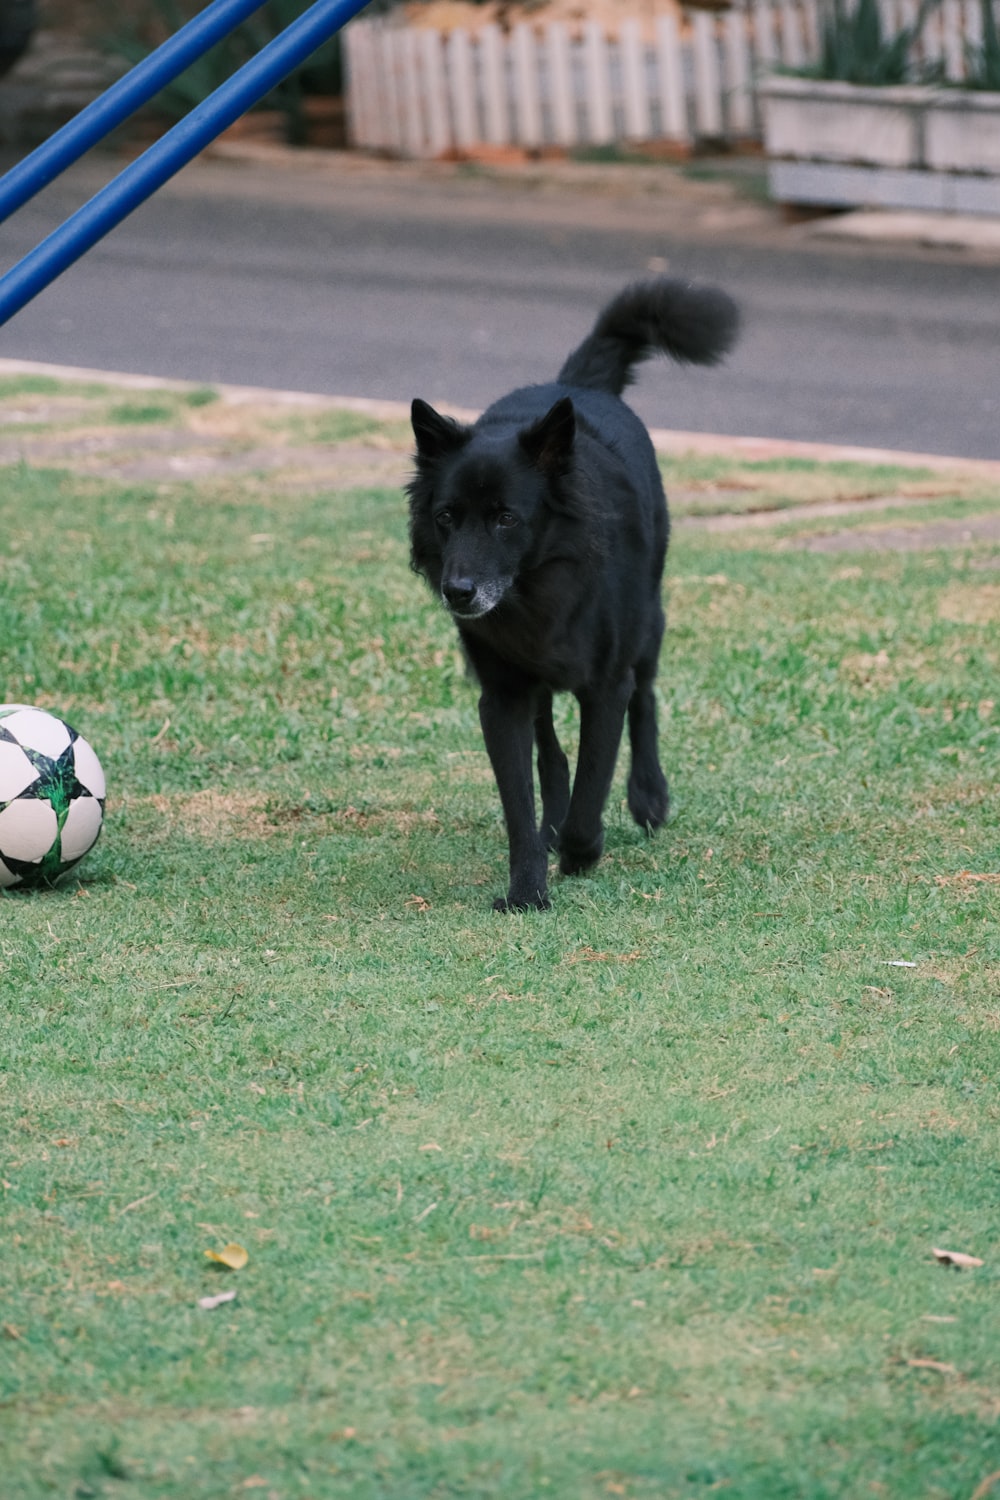 a small black dog standing next to a soccer ball